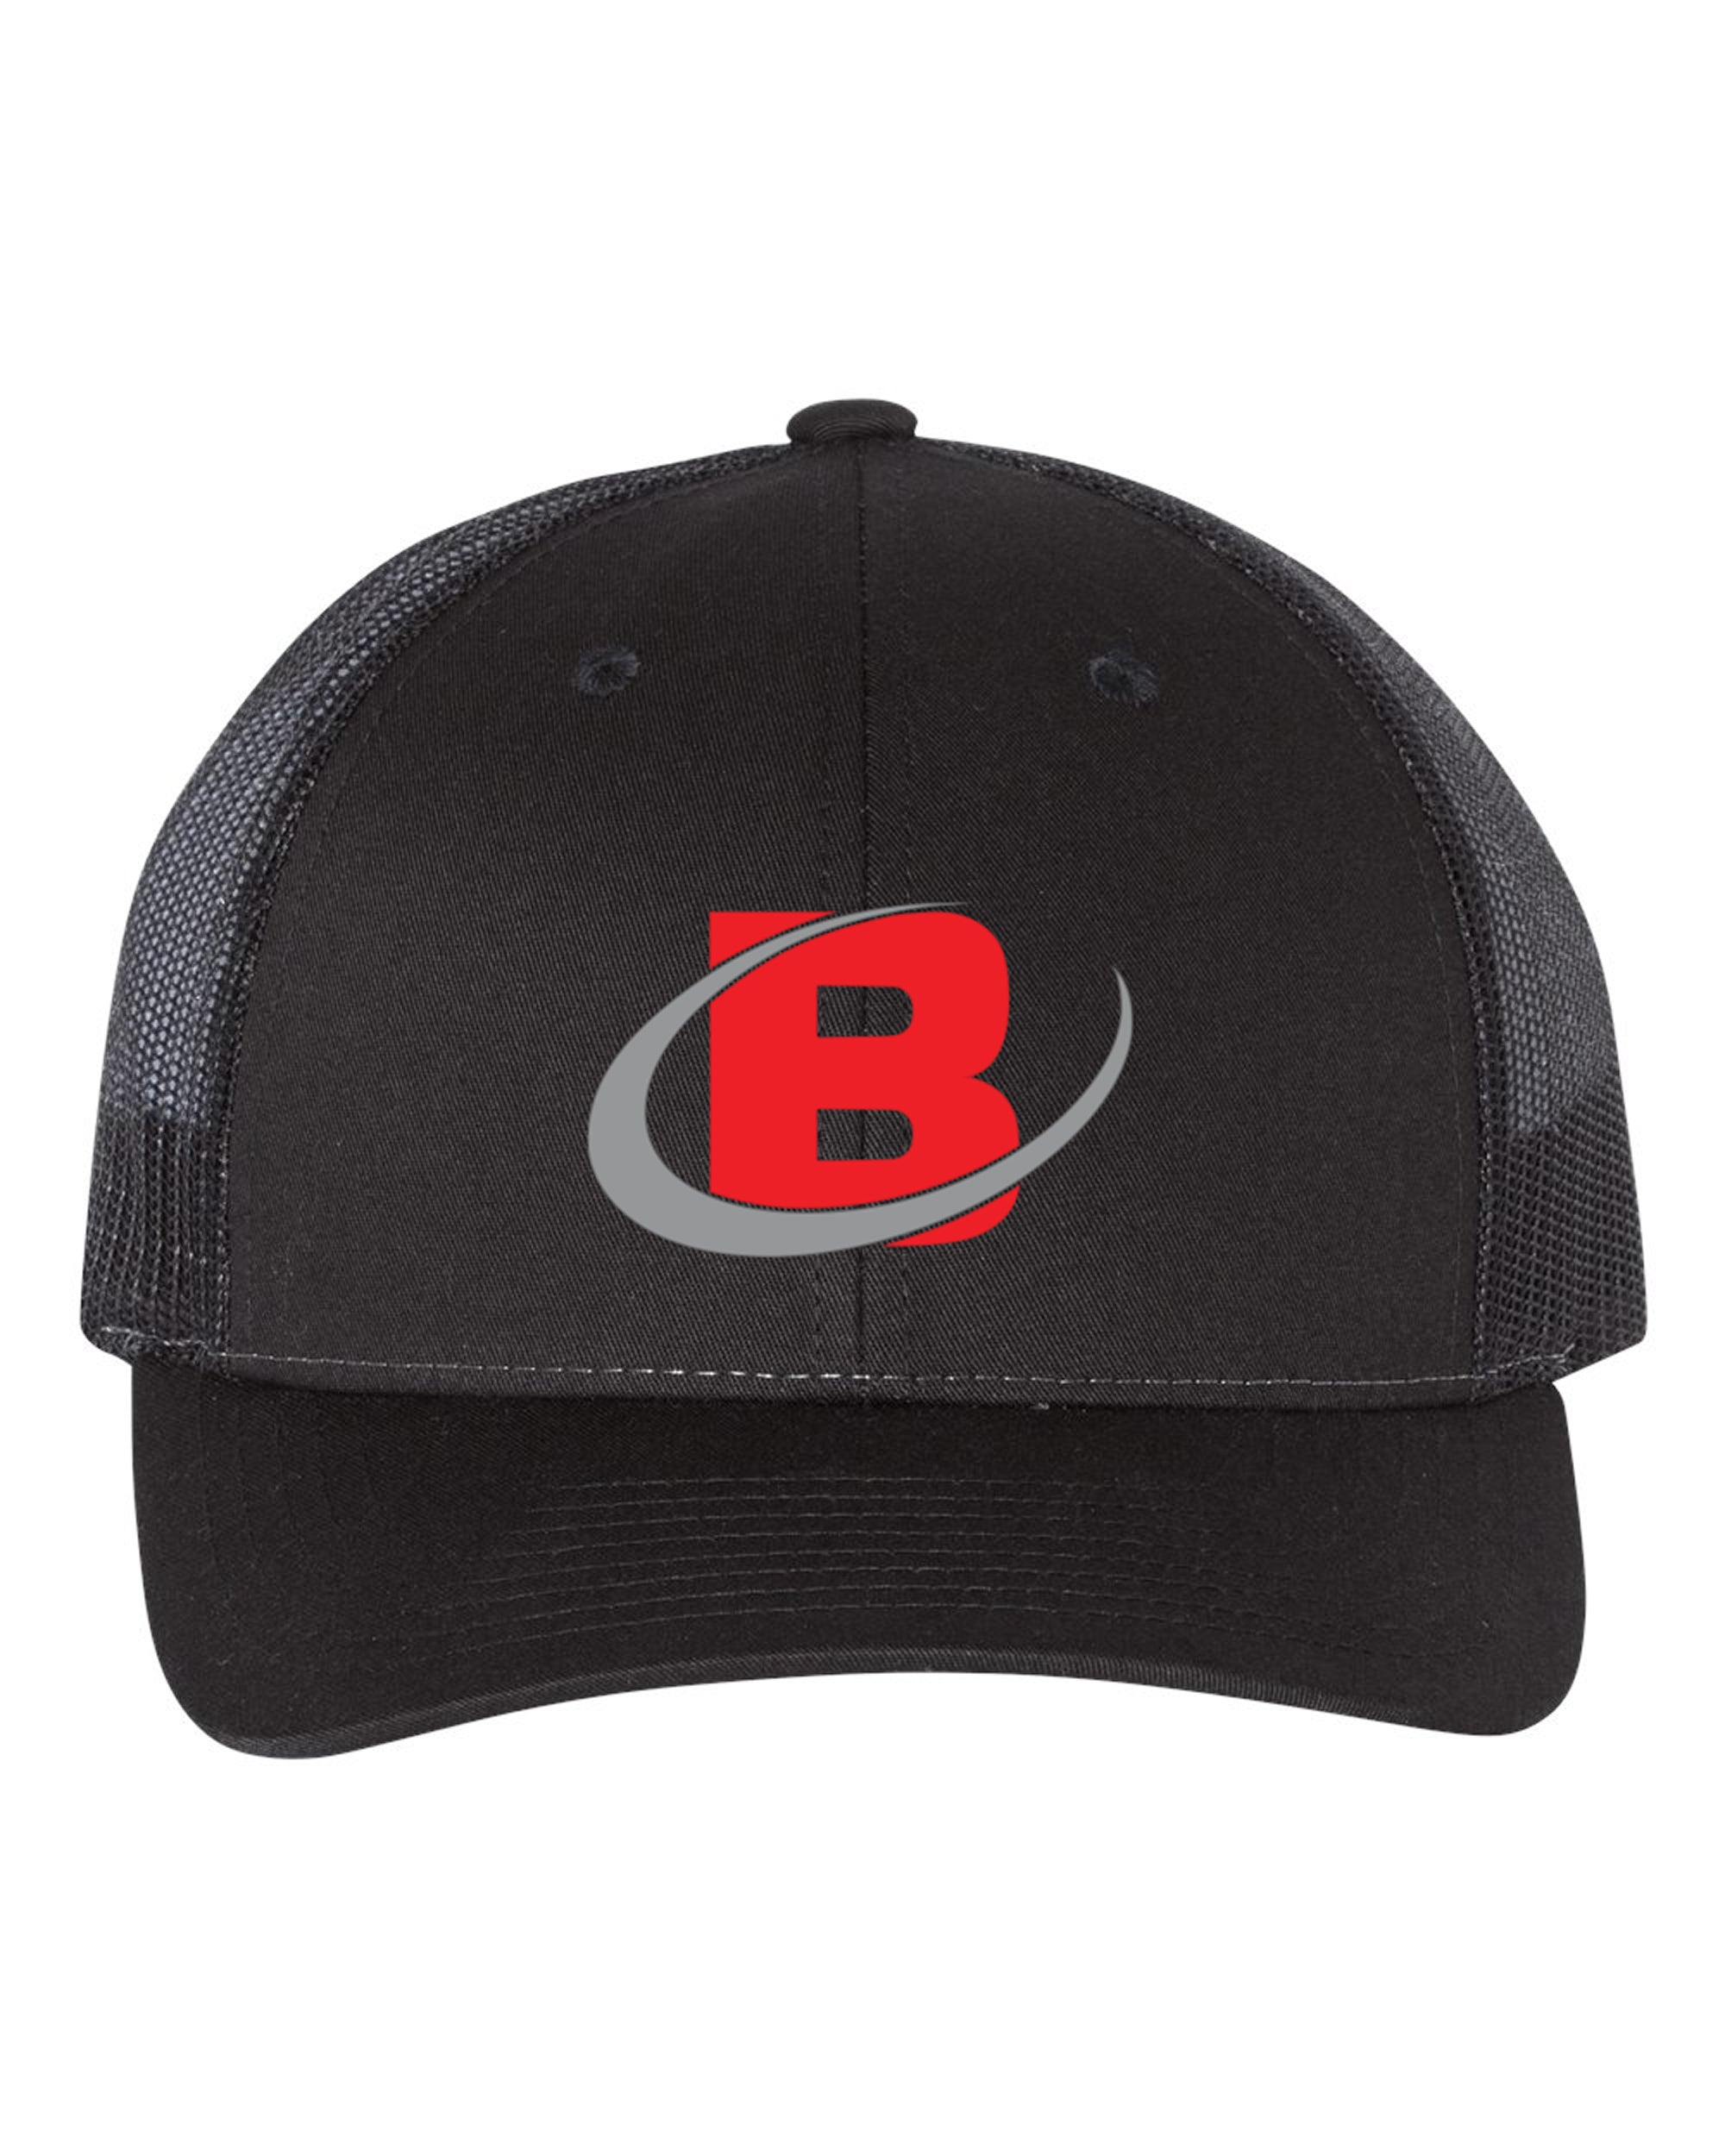 Bowman Excavating - Structured Hat